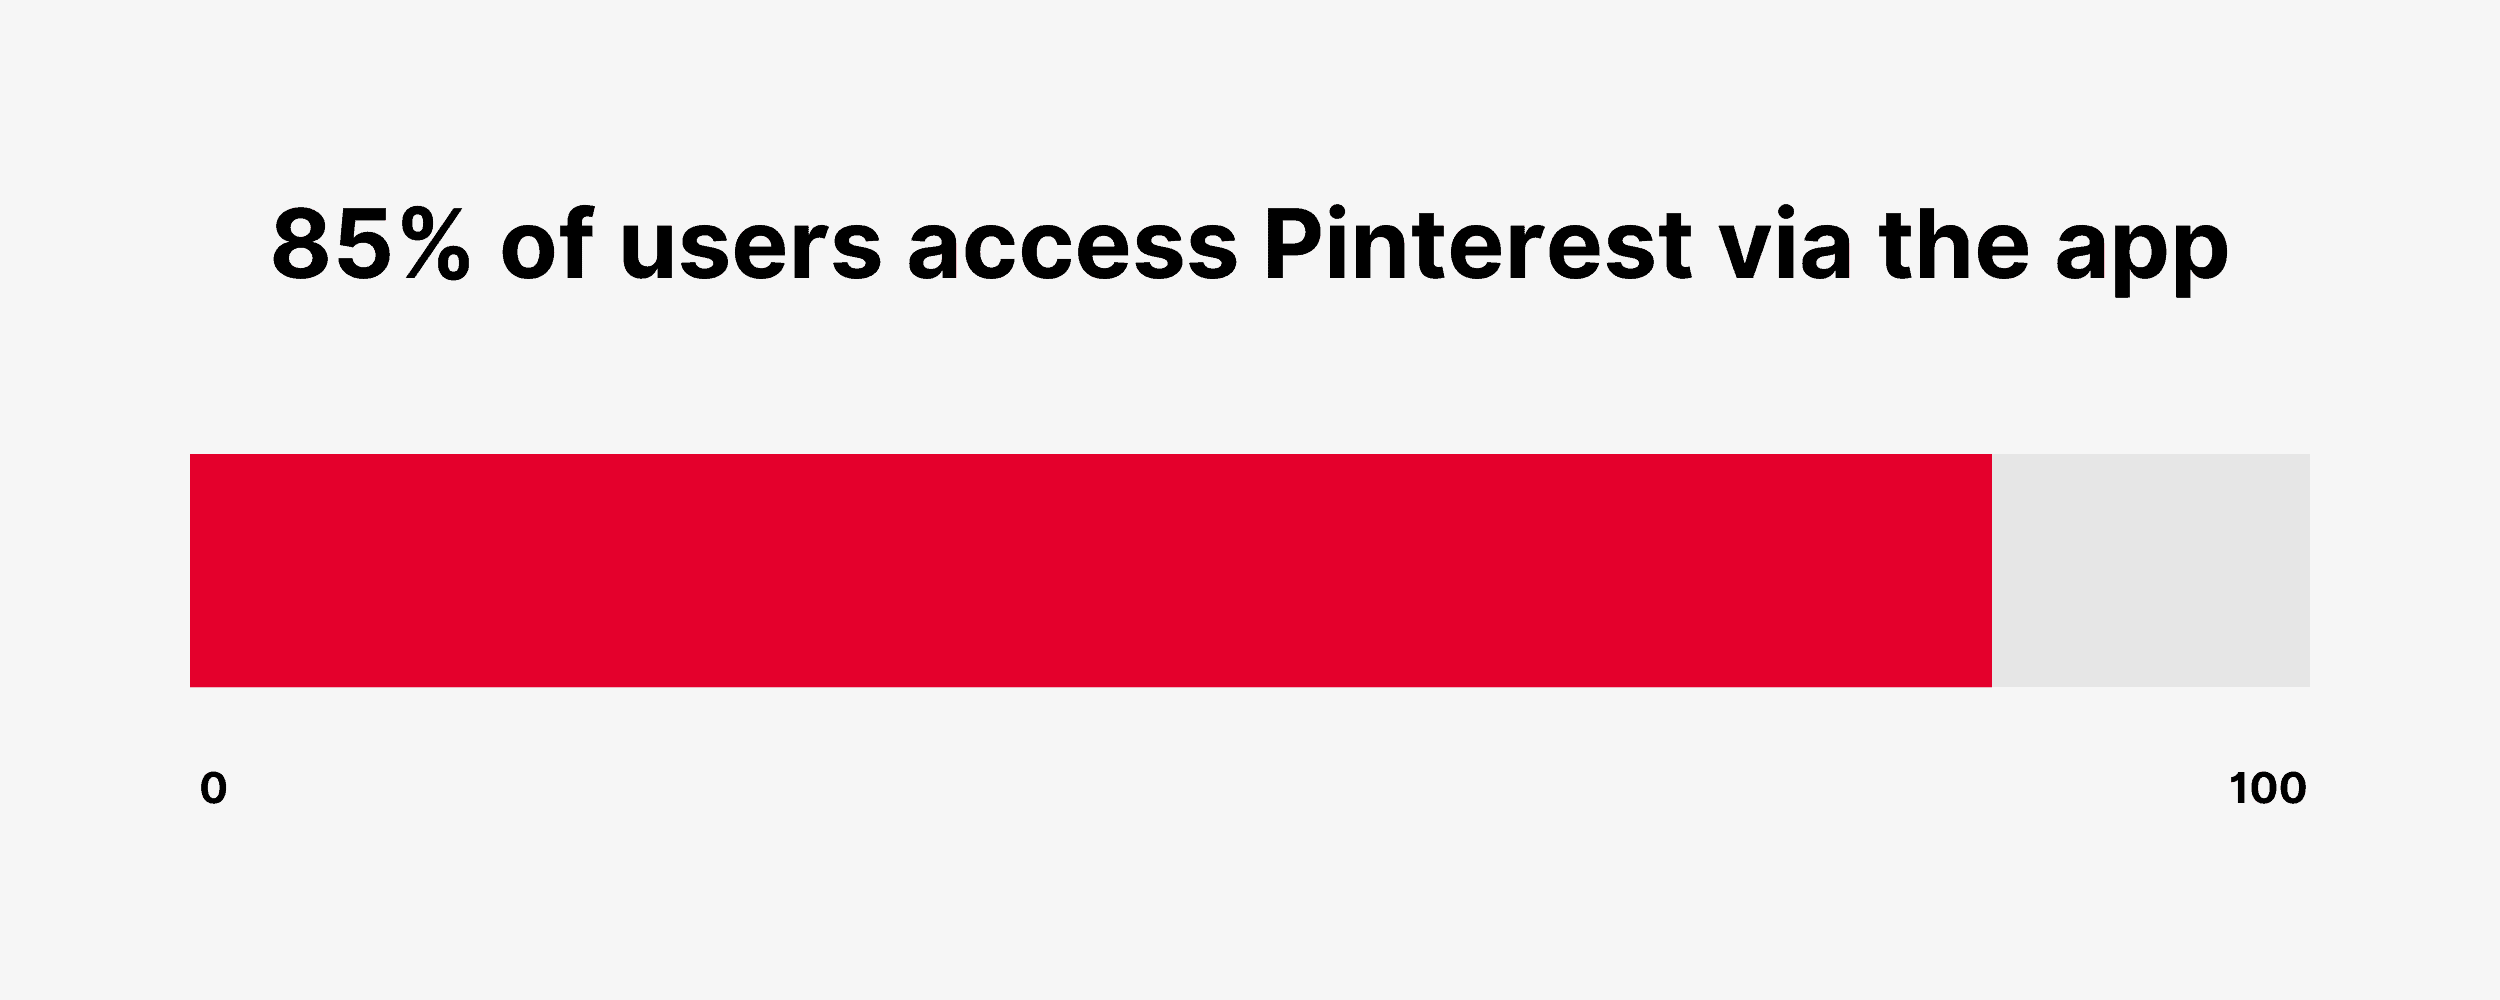 85% of users access Pinterest via the app